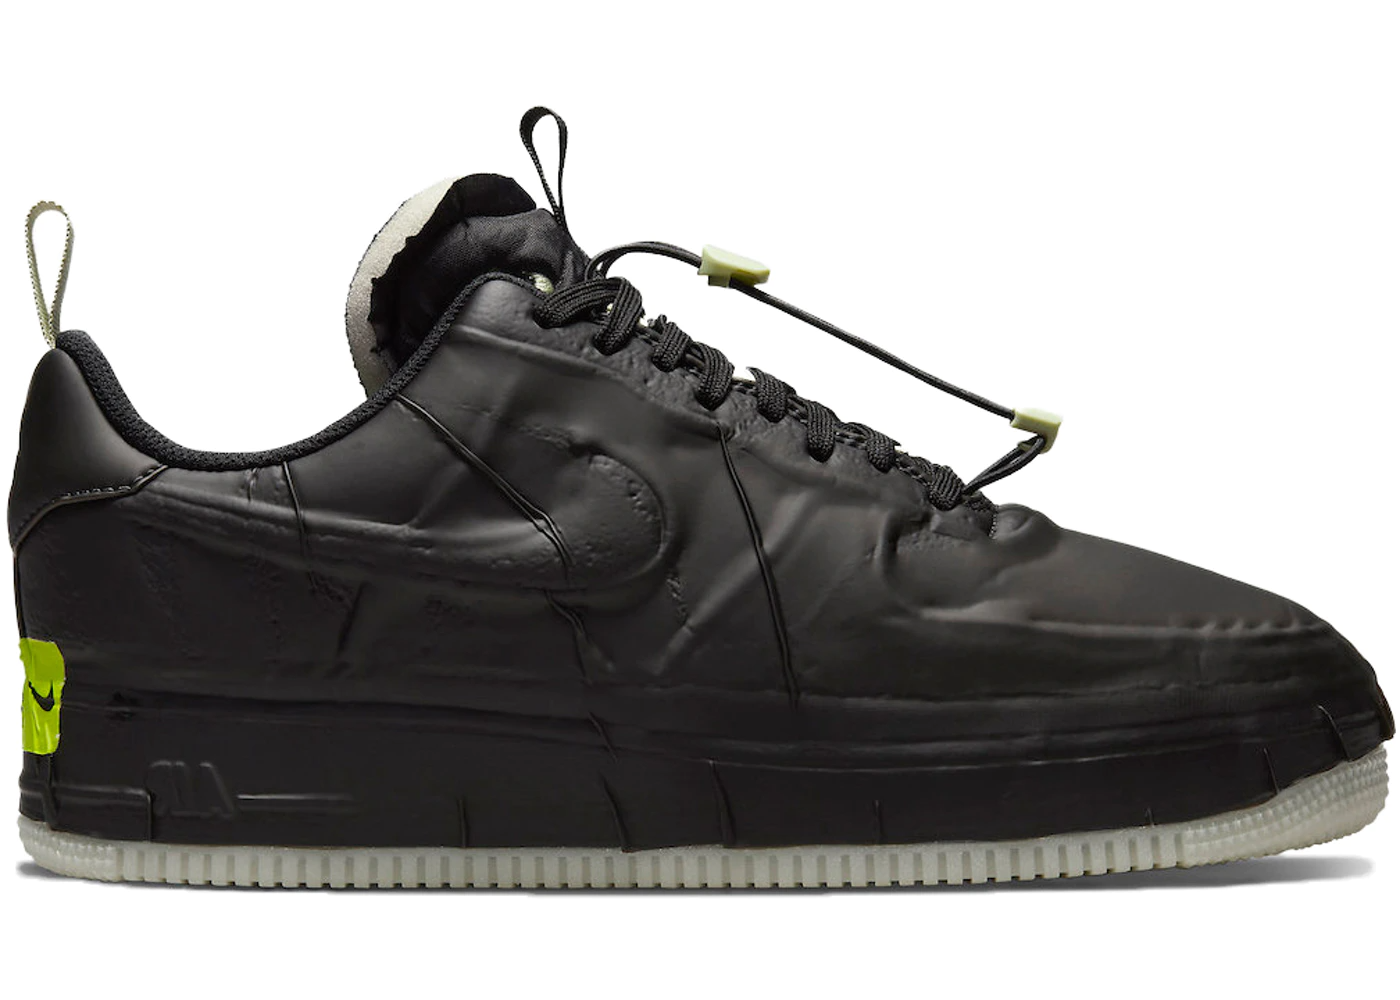 Now Available: Nike Air Force 1 Experimental 